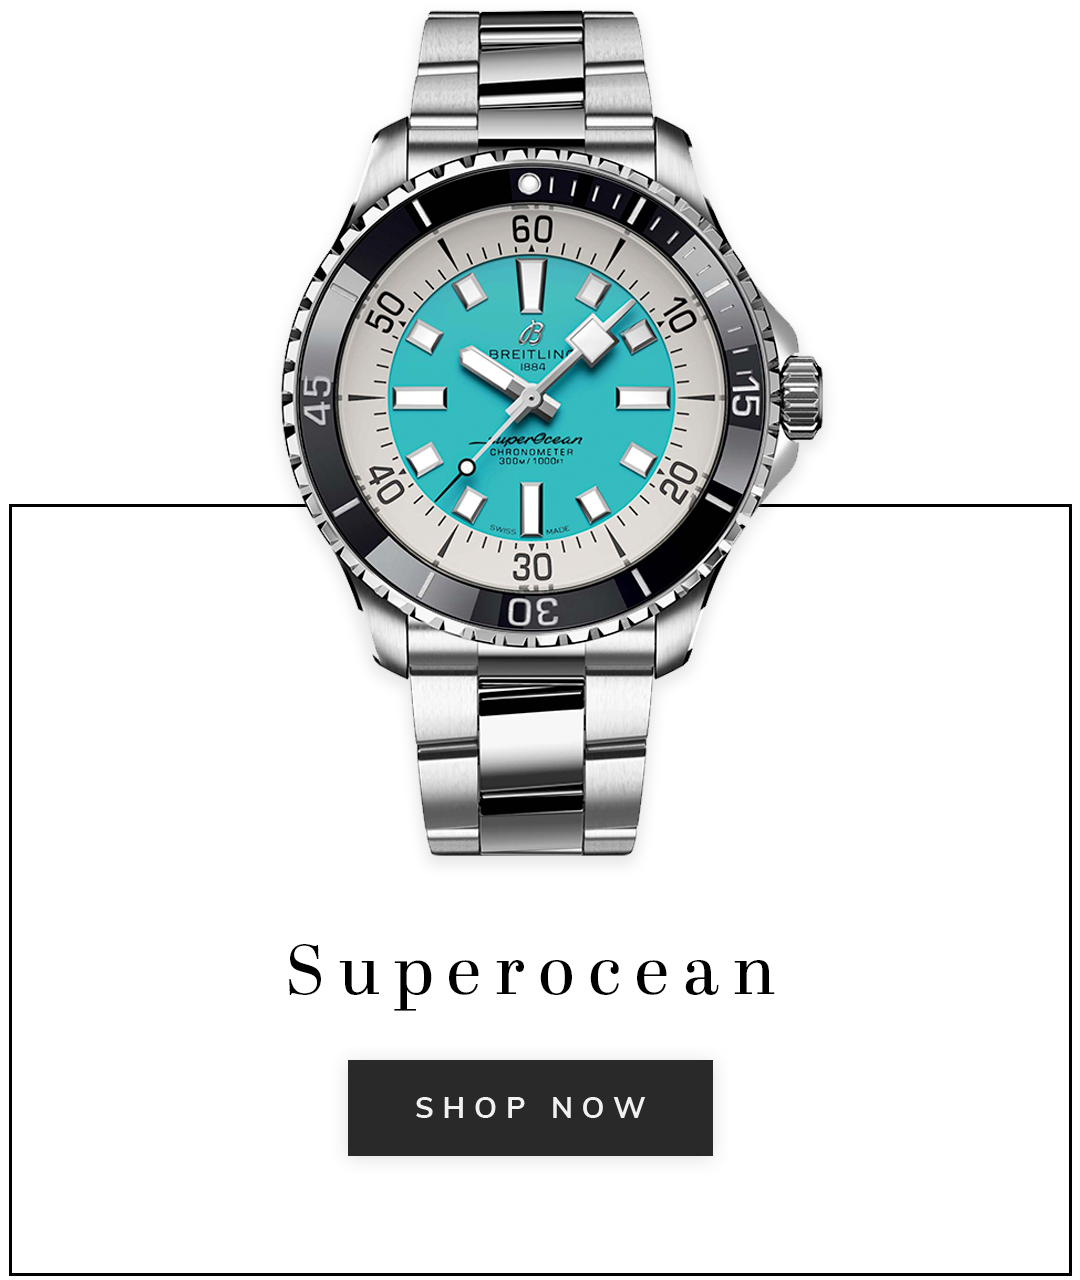 A Breitling Superocean watch with text shop now